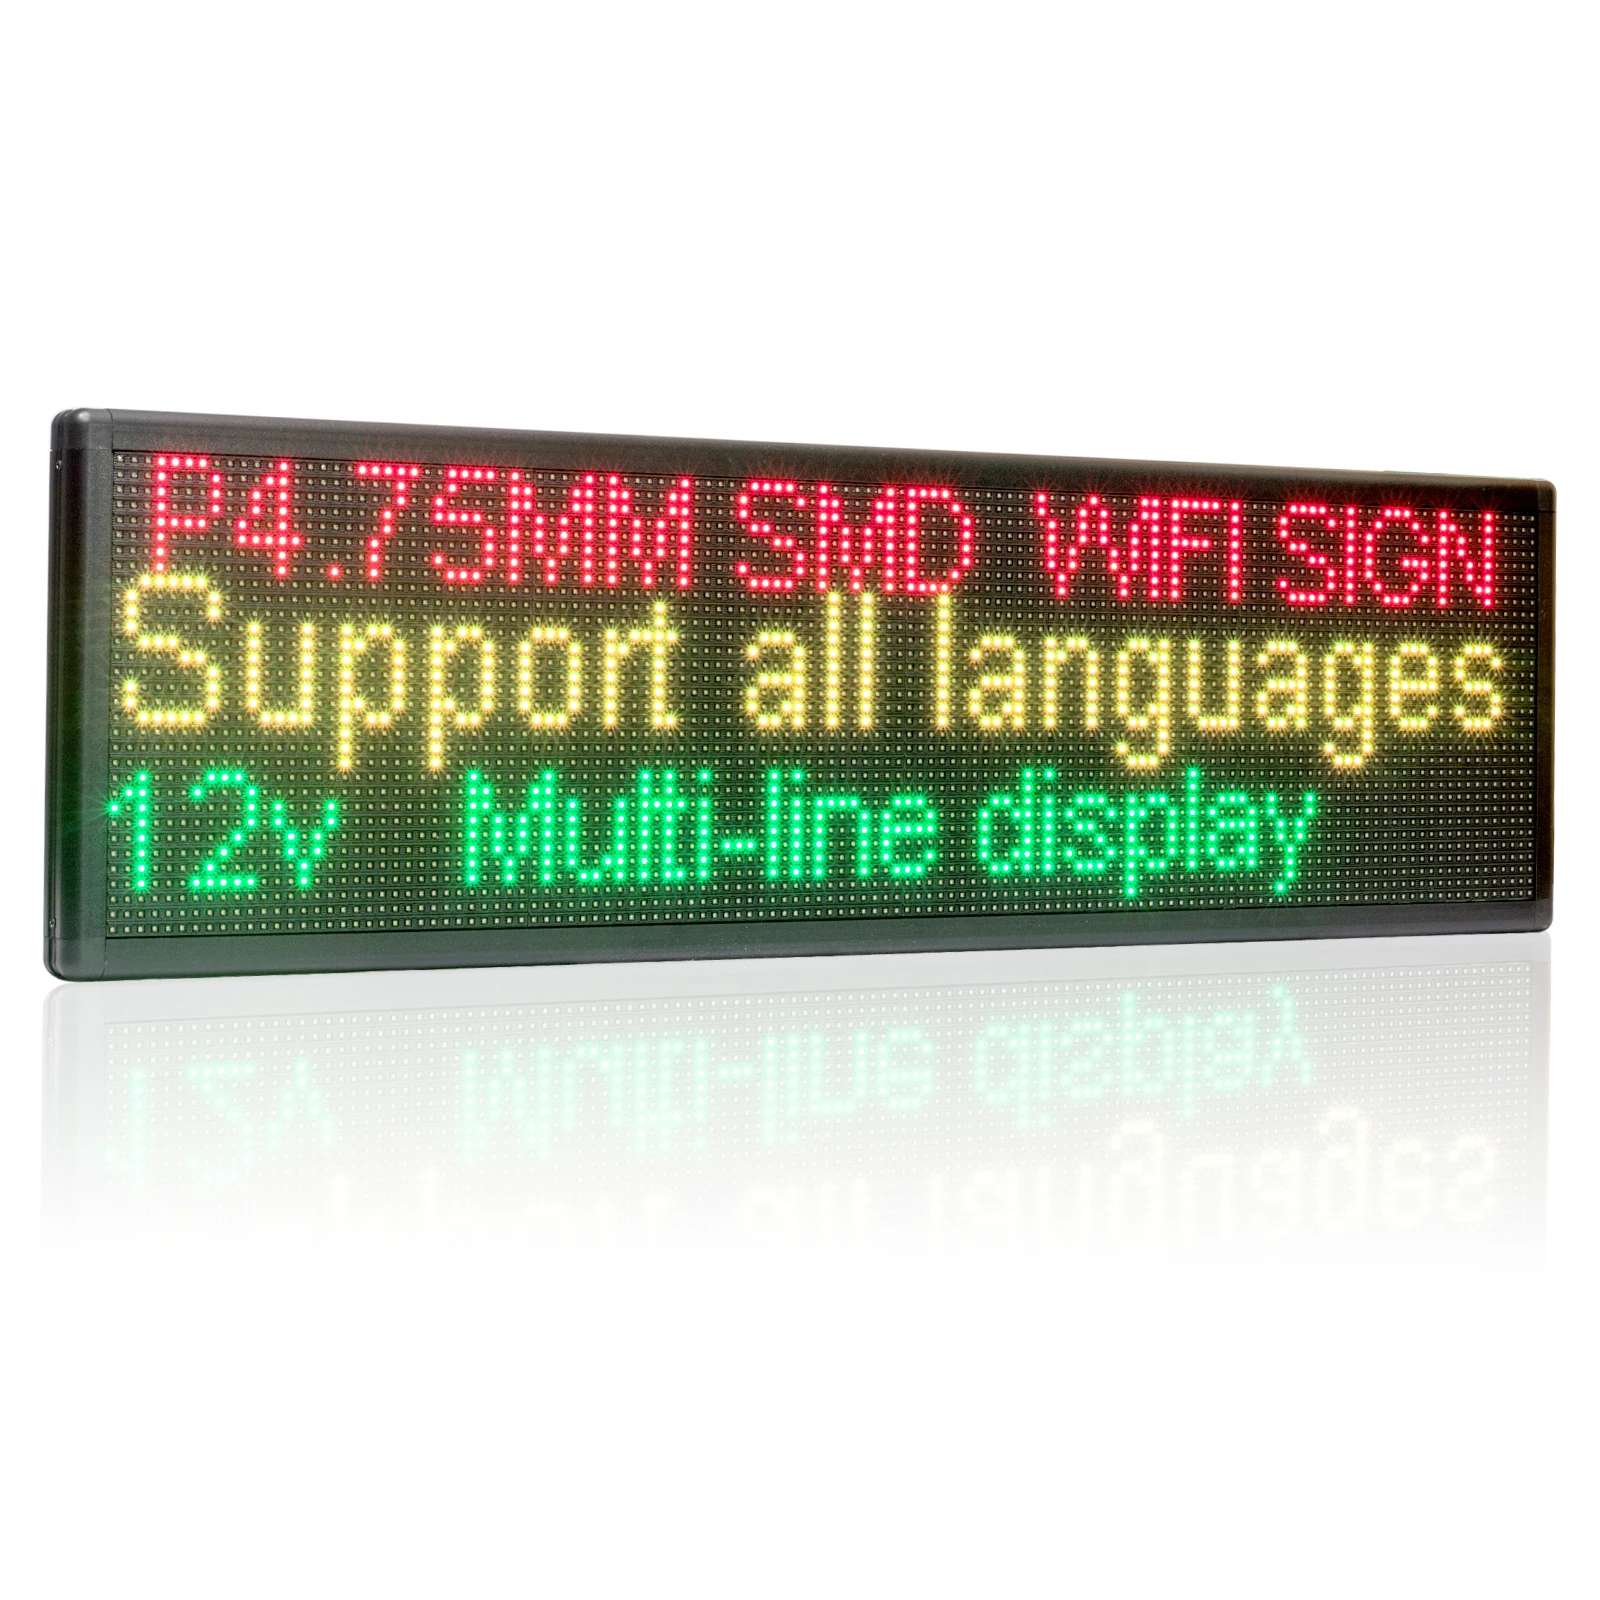 Scrolling Led Signs Full Color 40 X 8 With High Resolution P10 And New